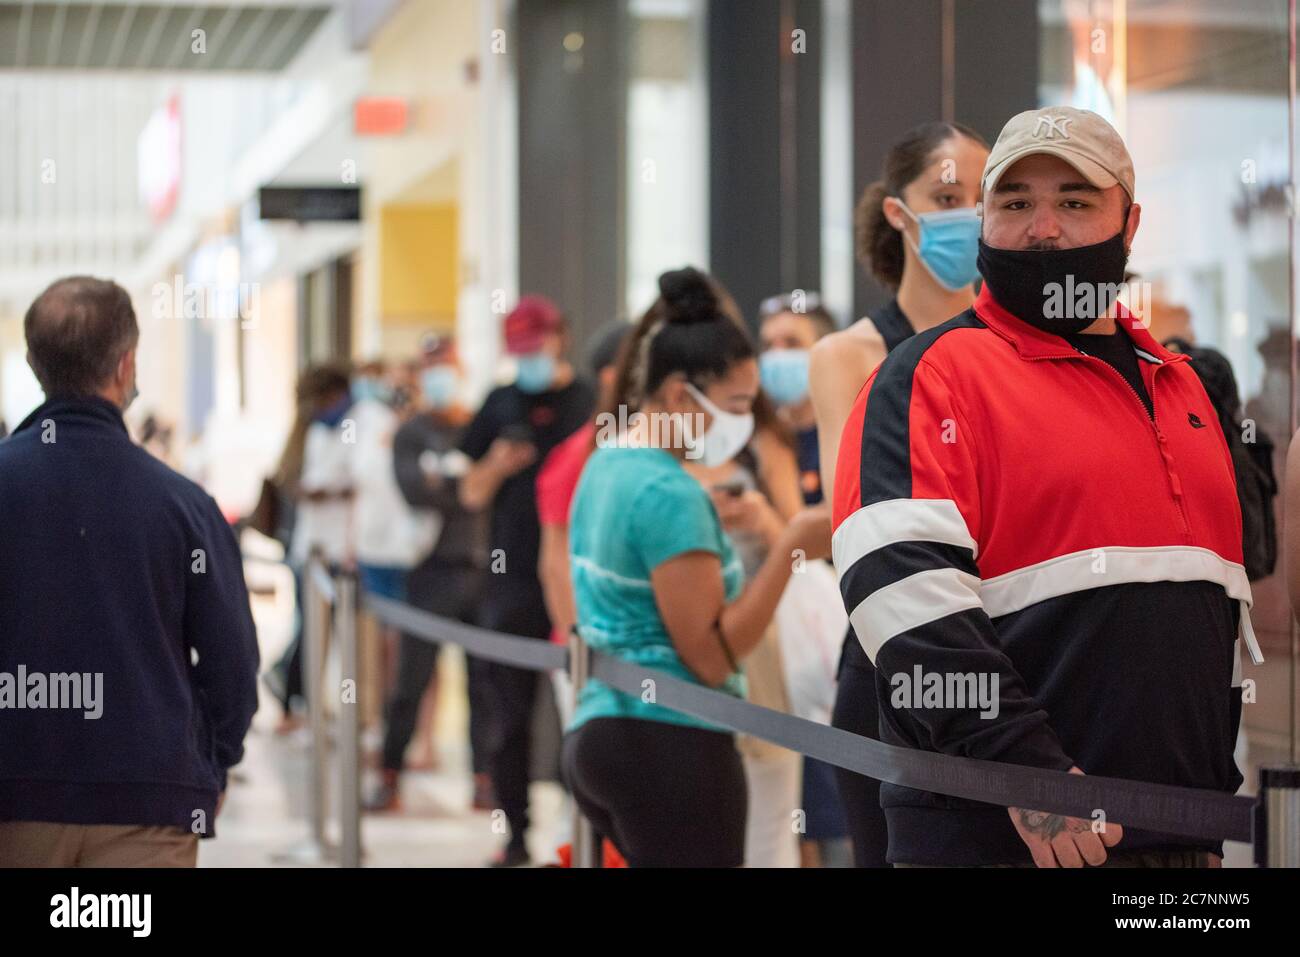 Sunrise, Florida, USA. 18th July, 2020. People shop at Sawgrass Mills Mall in Florida despite record high number of new Covid-19 cases in the state this week Credit: Orit Ben-Ezzer/ZUMA Wire/Alamy Live News Stock Photo